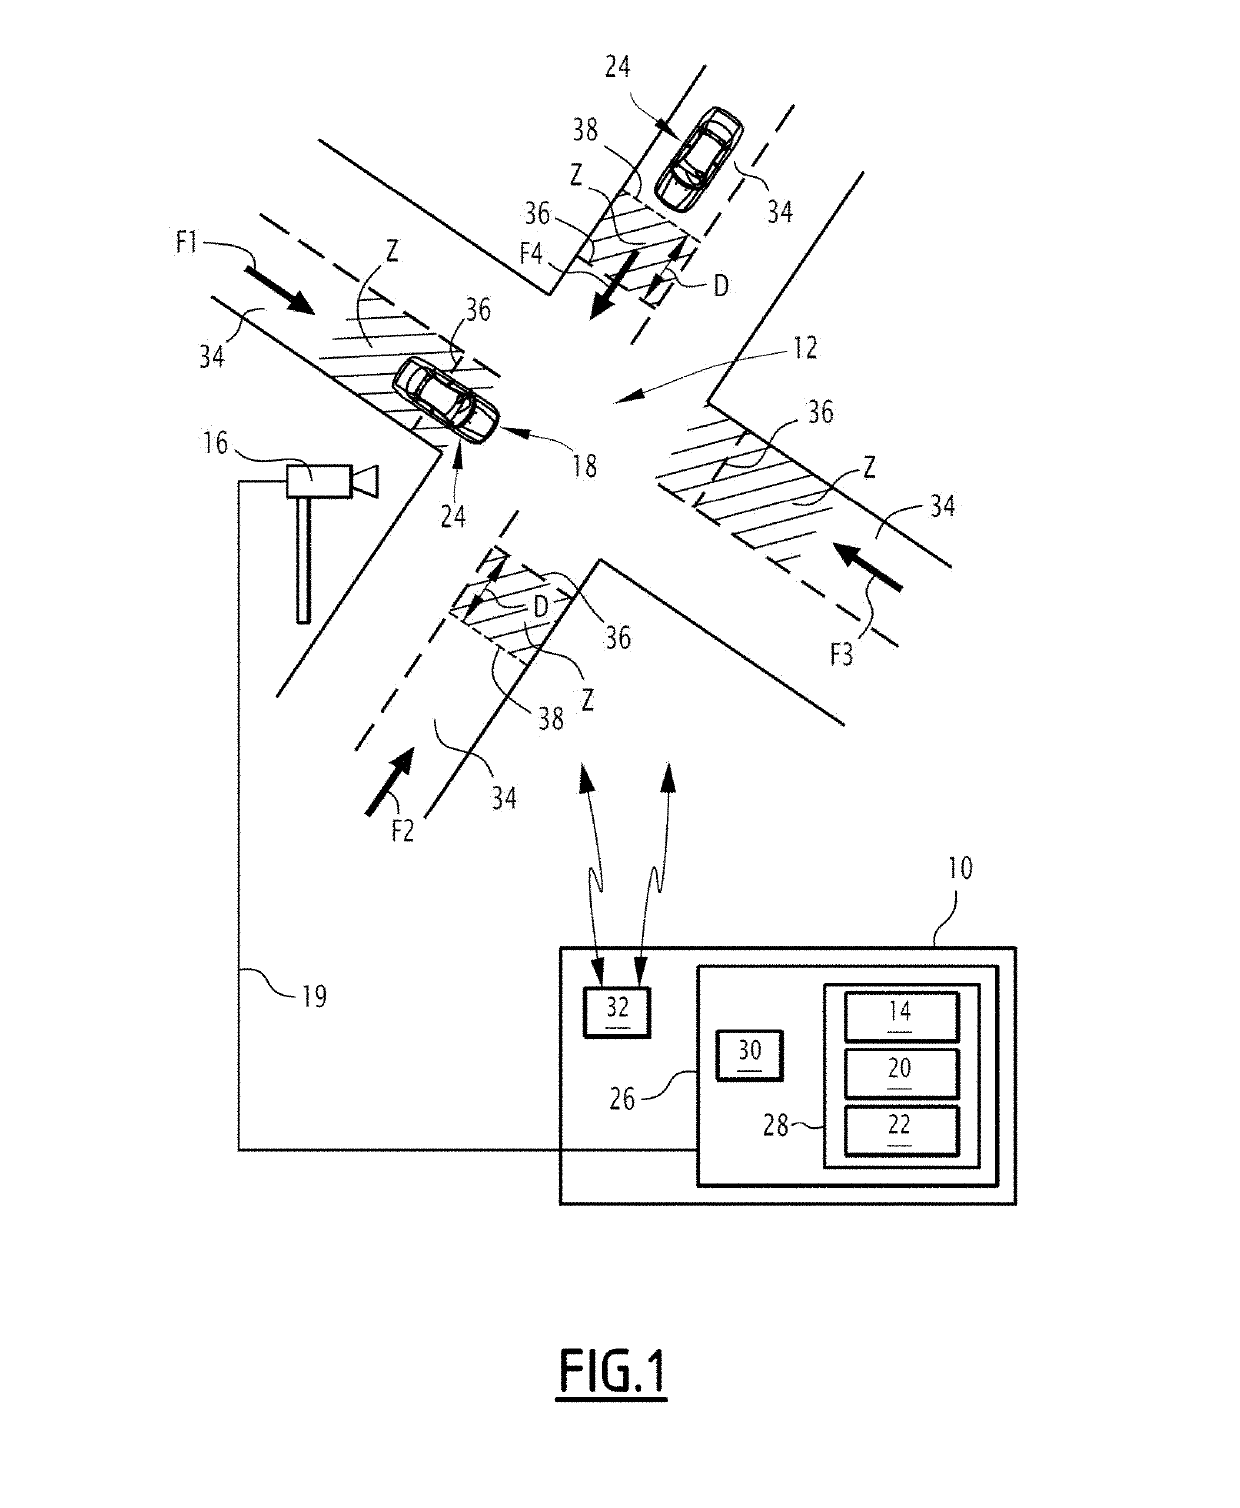 Electronic device and method for monitoring a road intersection zone for autonomous motor vehicle(s), related computer program